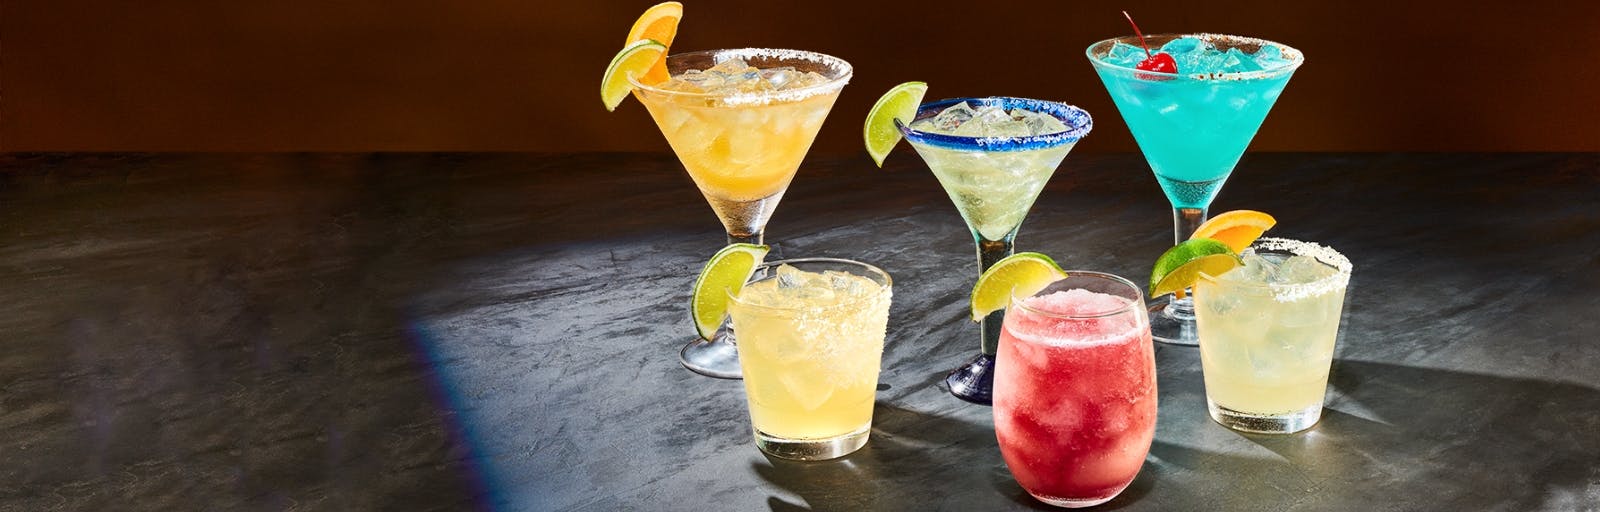 Chili's Alcohol Menu: Discover Our Best Drinks!